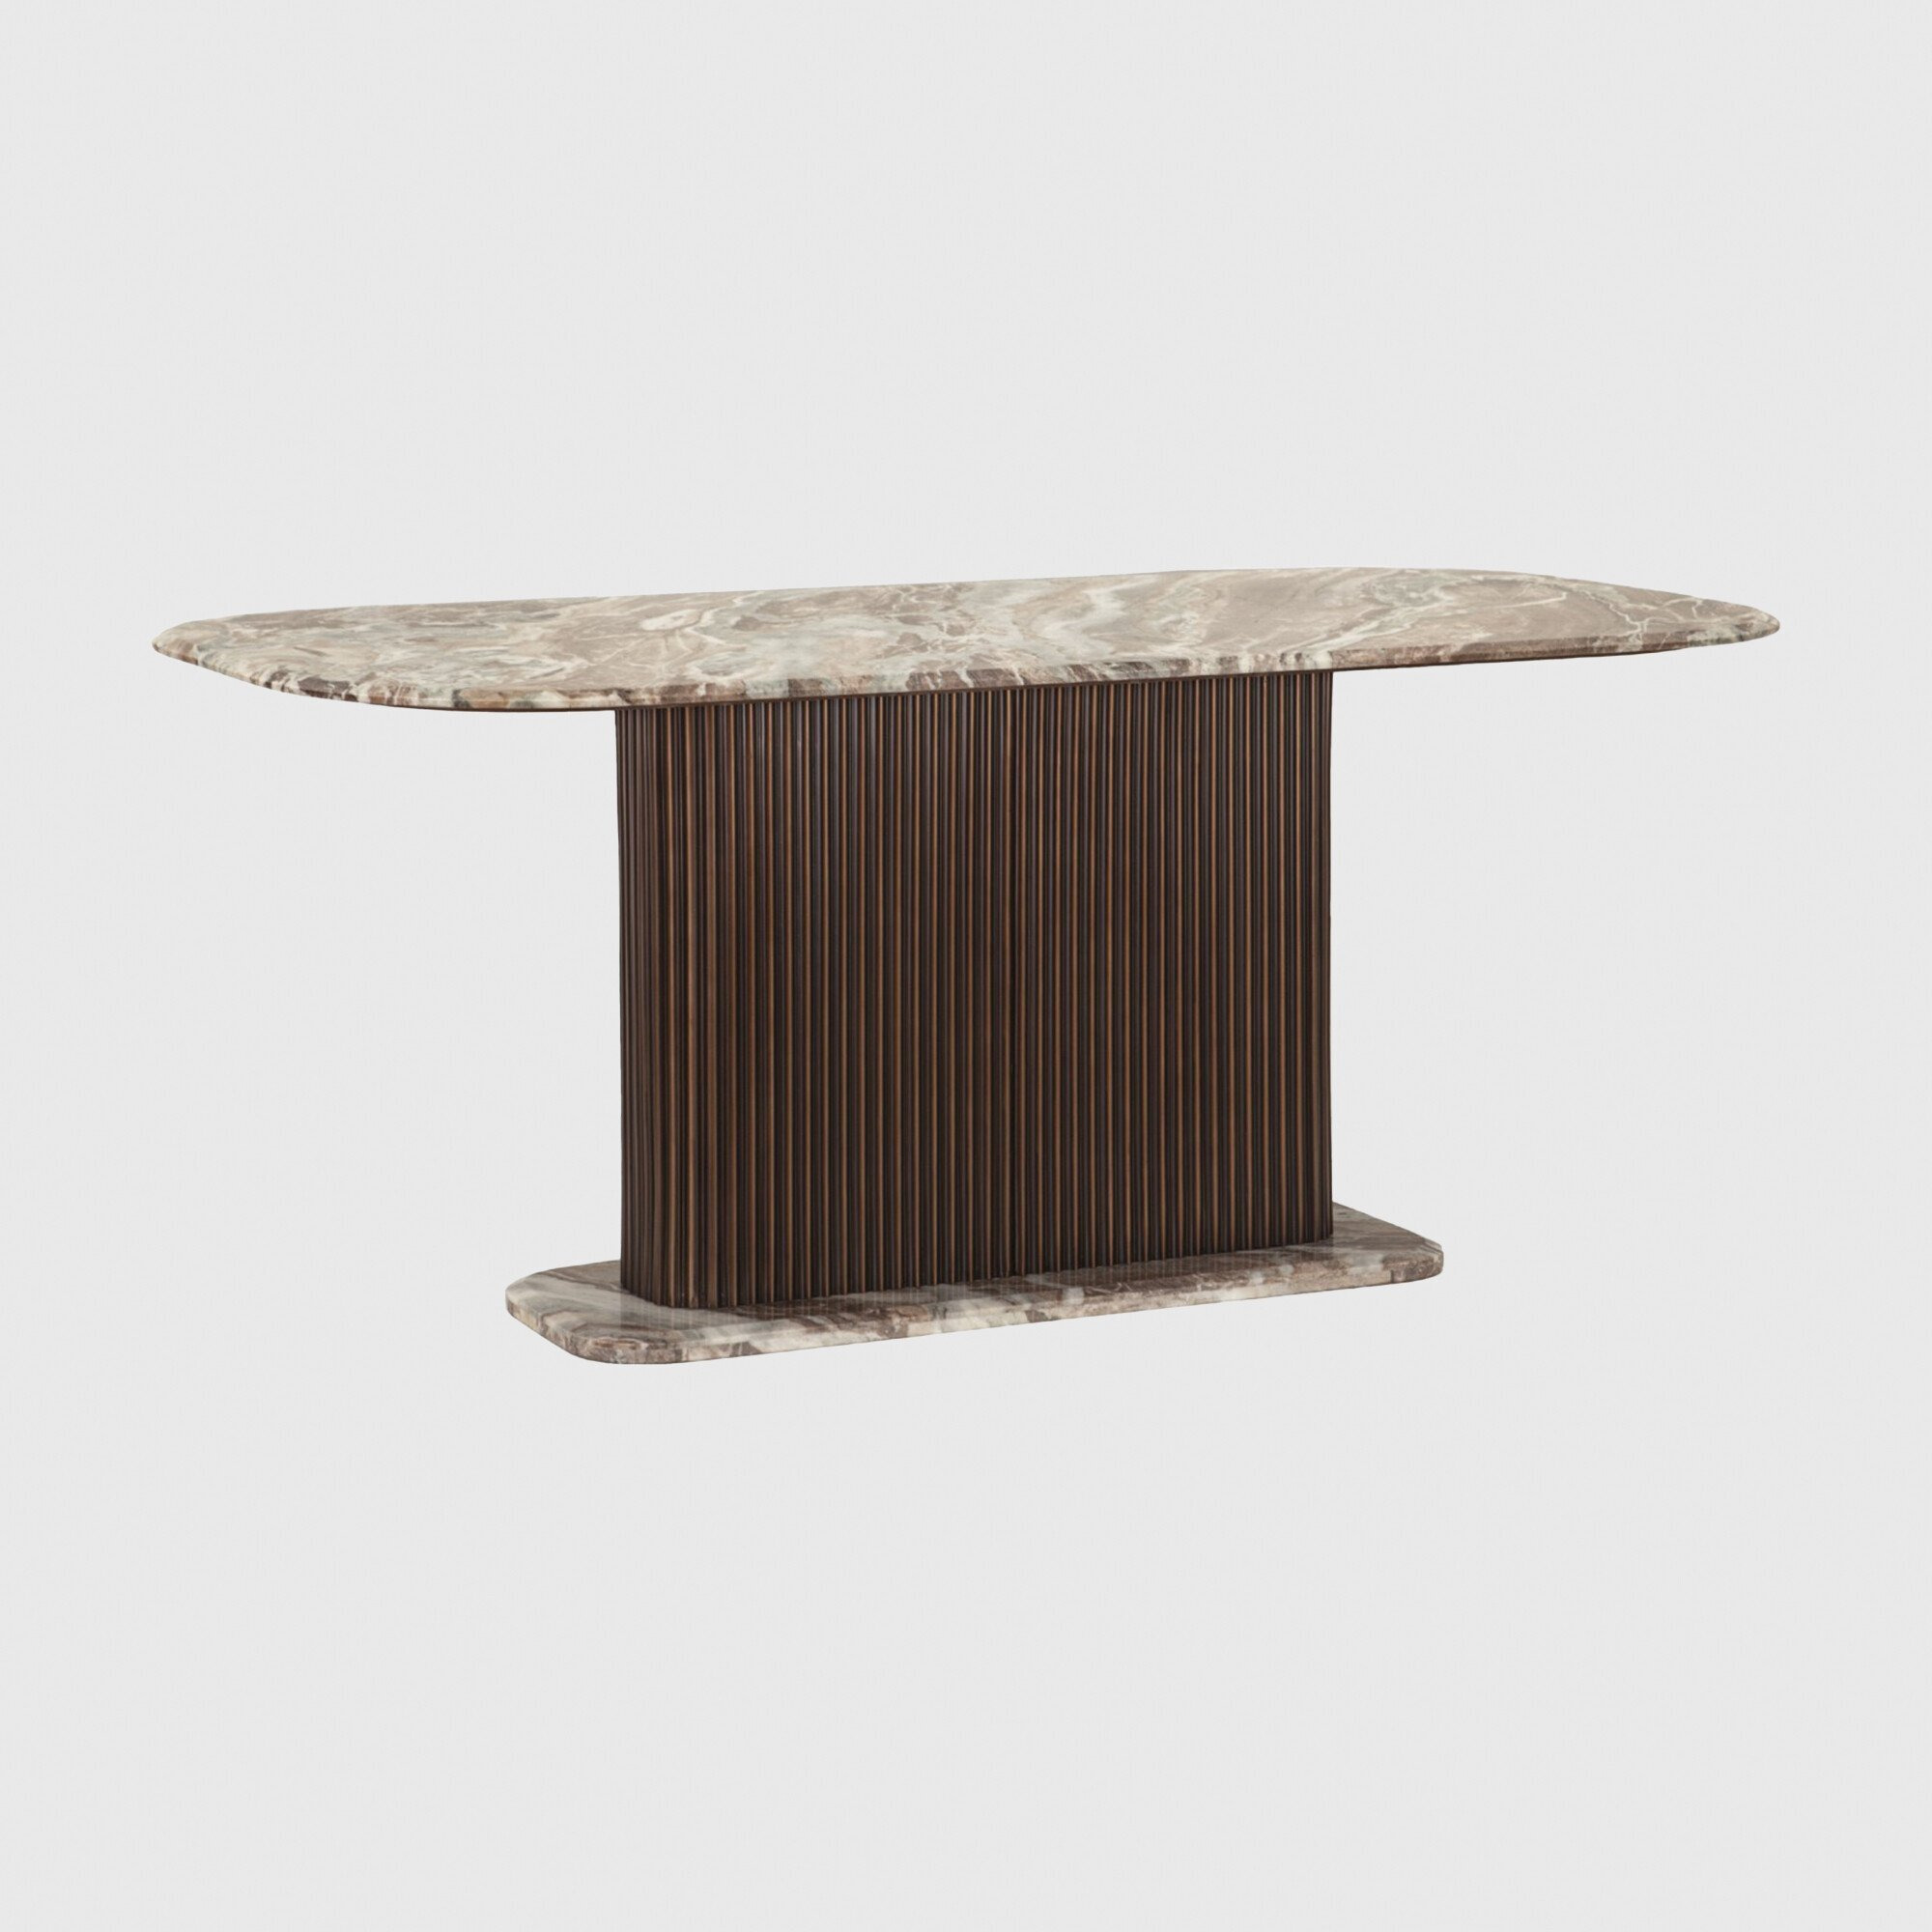 Gion Dining Table 180CM, Brown Marble - Barker & Stonehouse - image 1